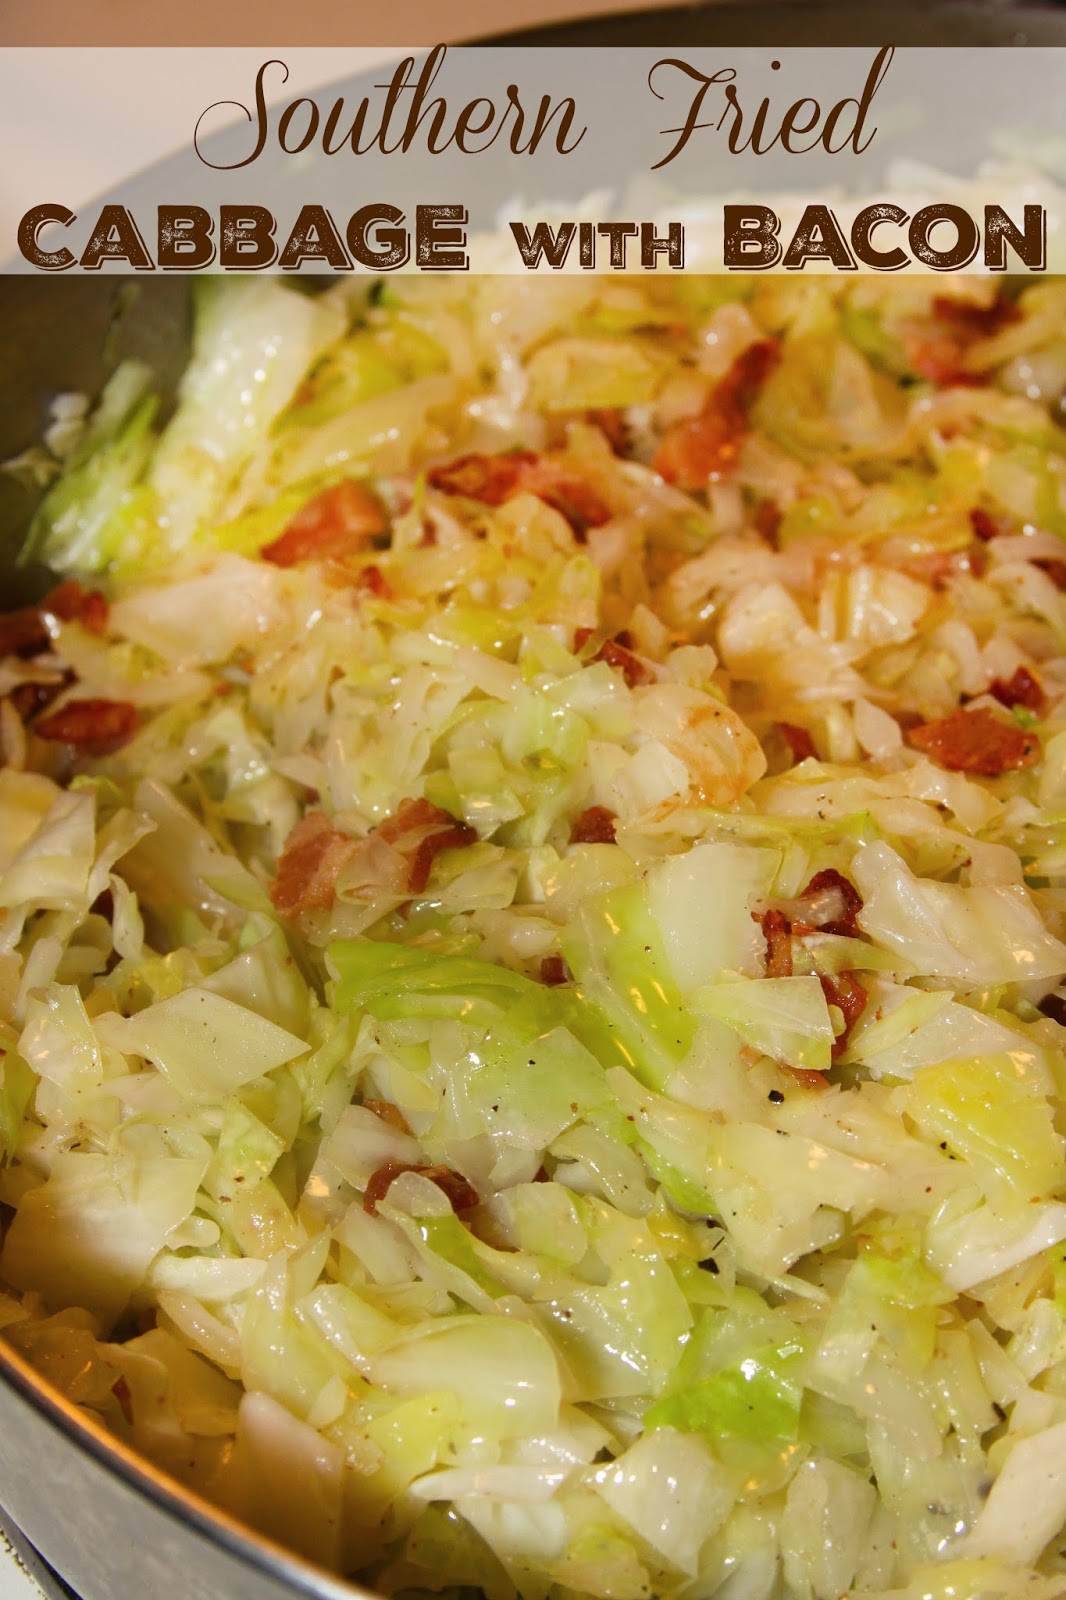 For the Love of Food: New Year's Southern Fried Cabbage